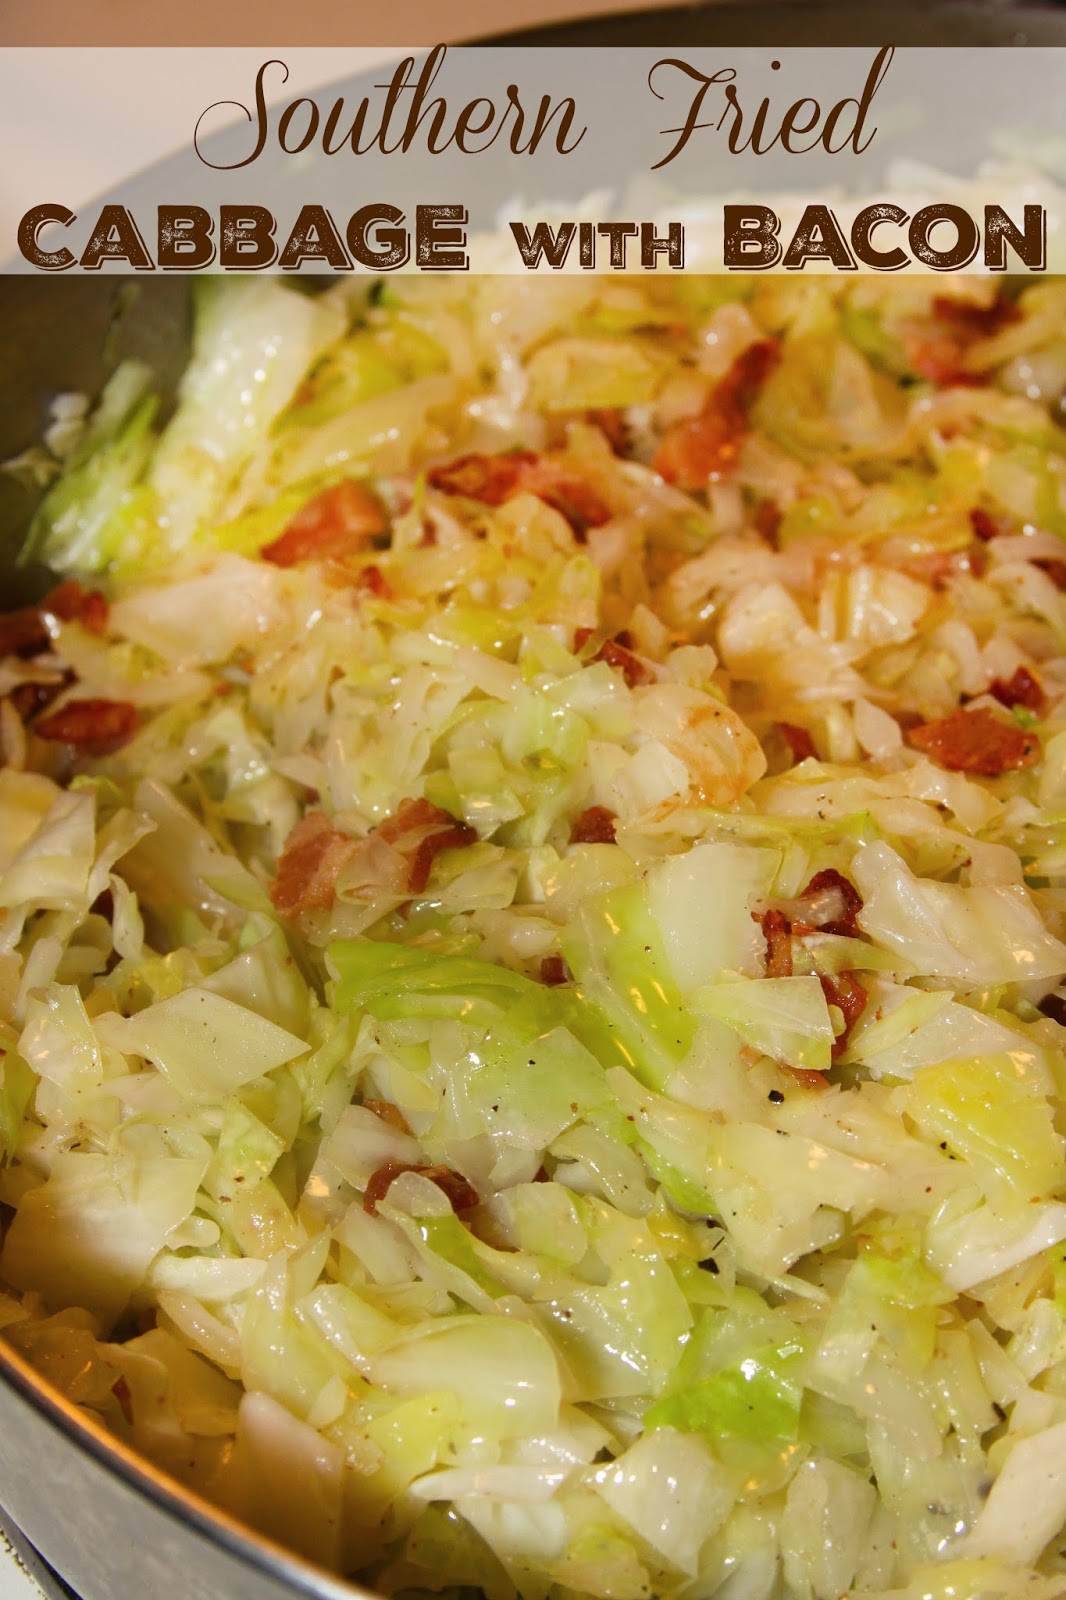 For the Love of Food: New Year's Southern Fried Cabbage